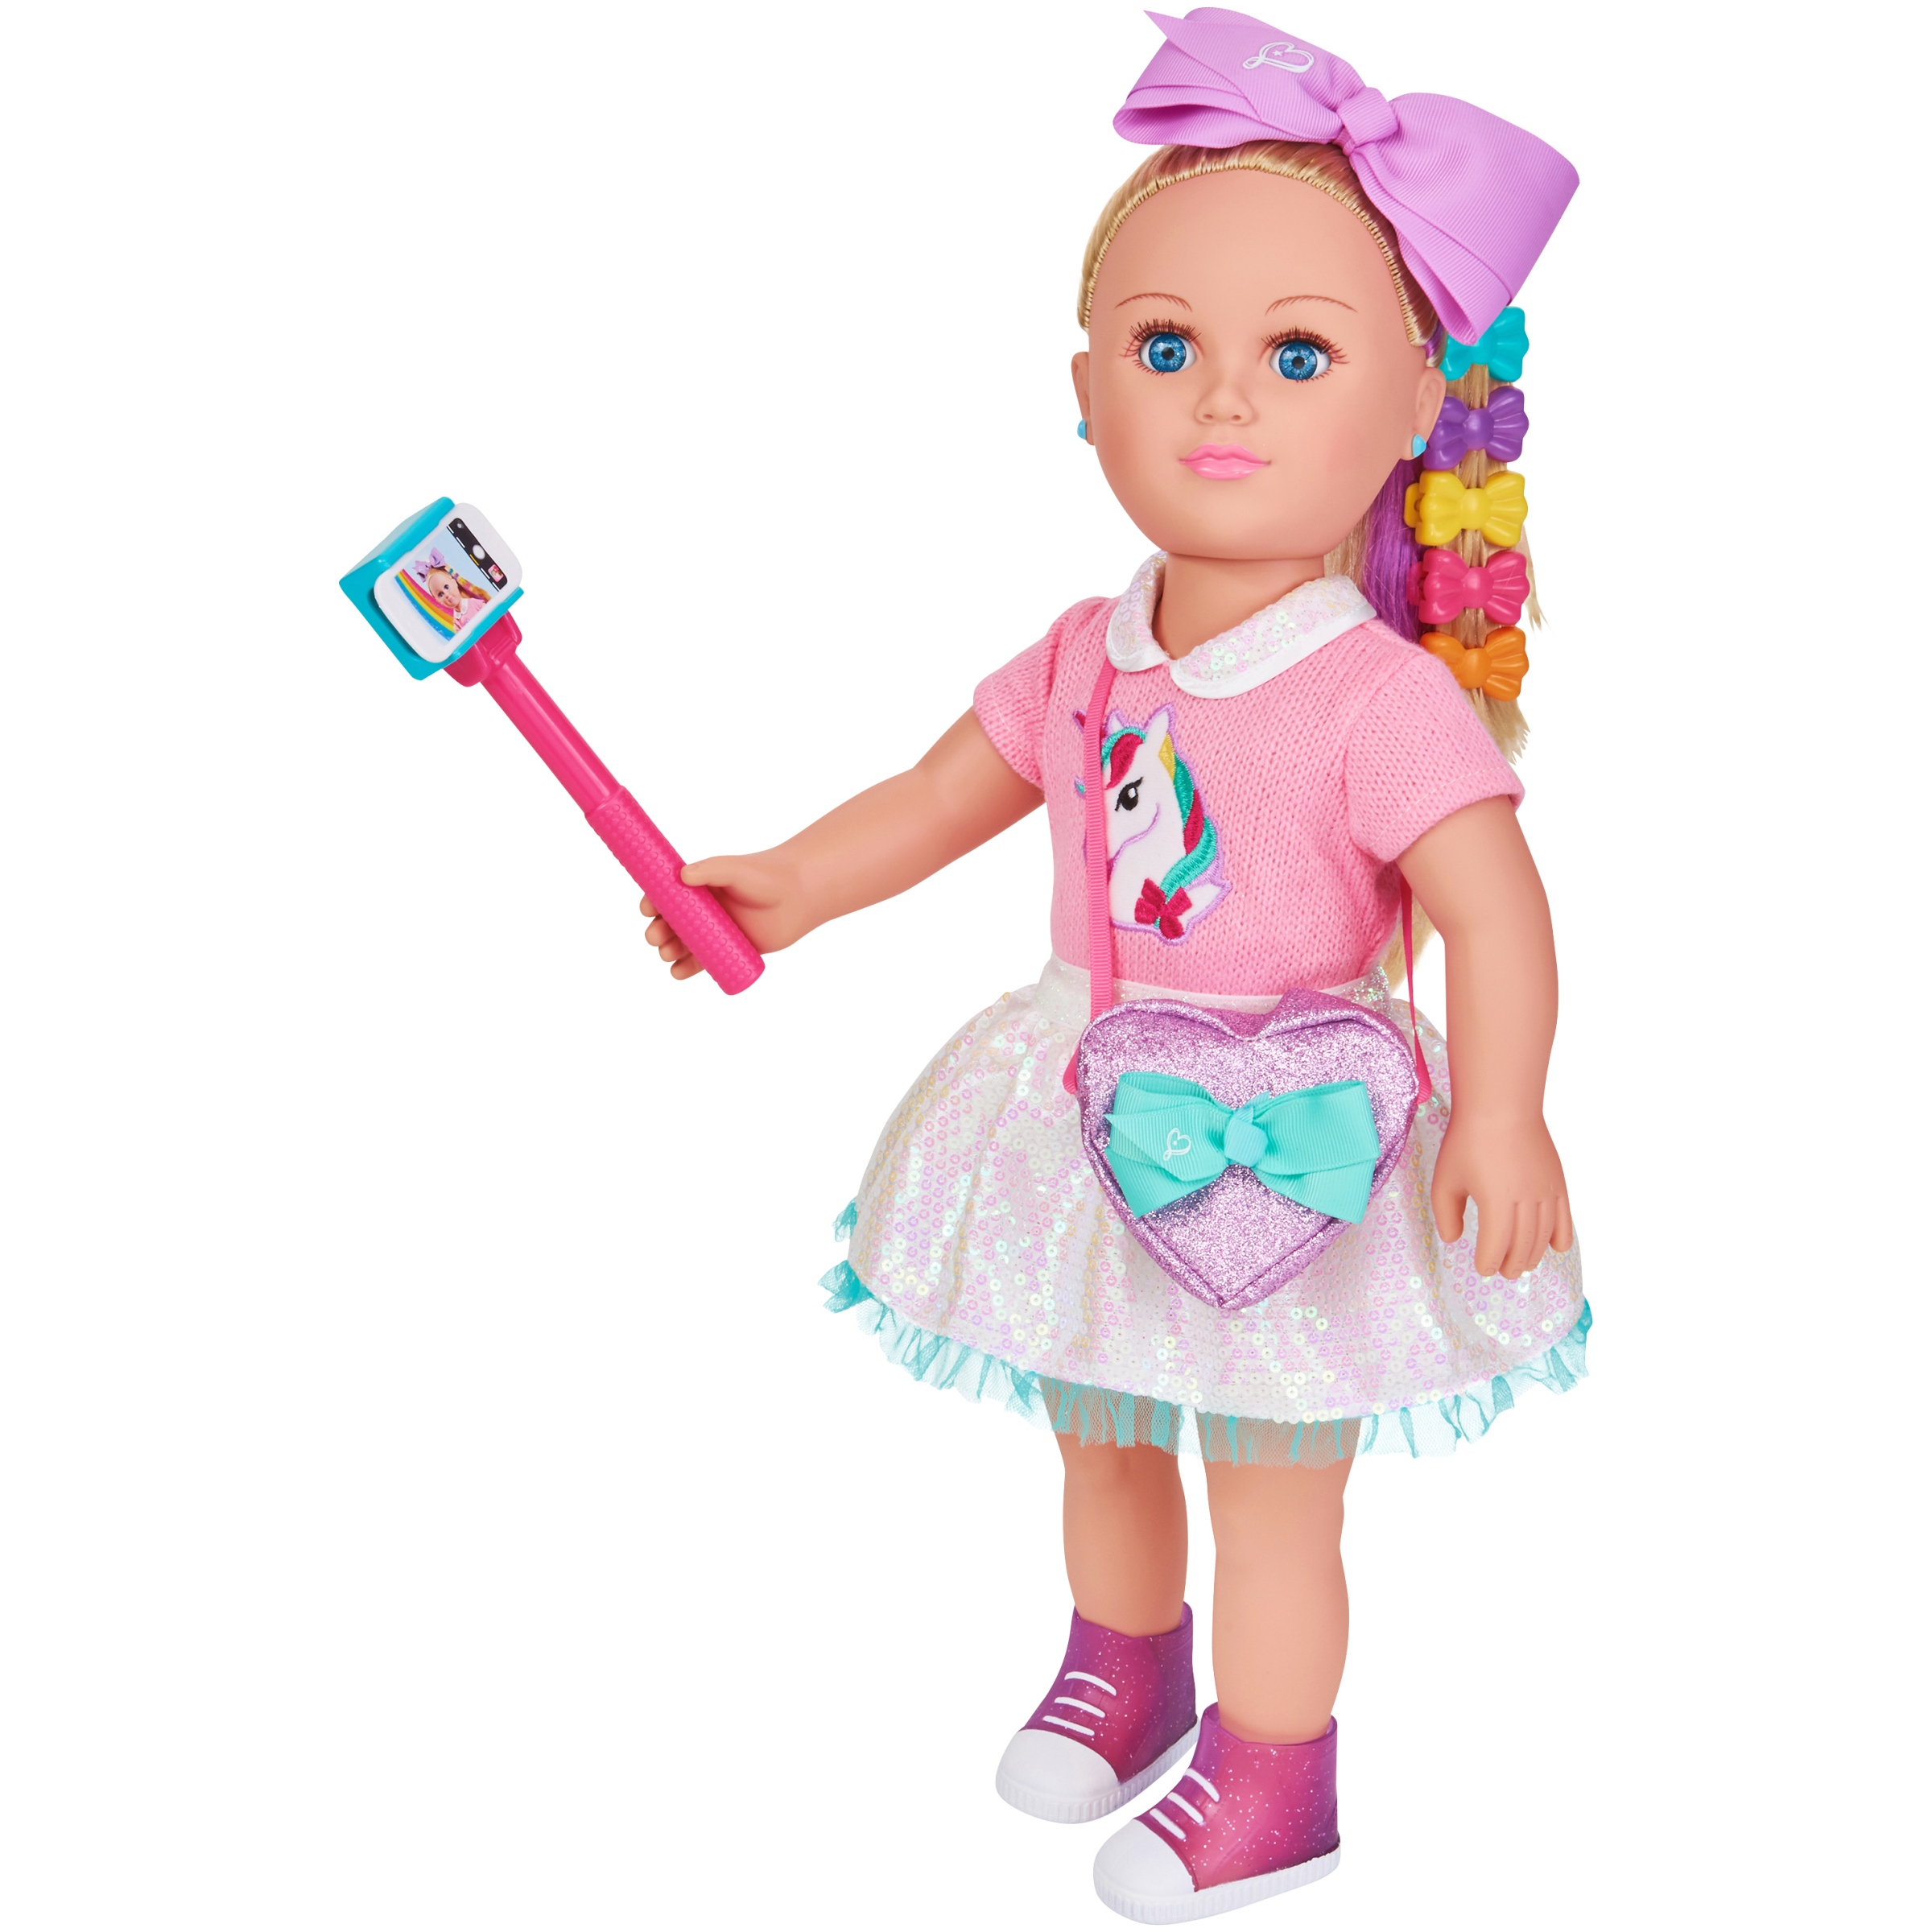 My Life As 18" Poseable JoJo Siwa Doll, Blonde Hair with a Soft Torso - image 1 of 5